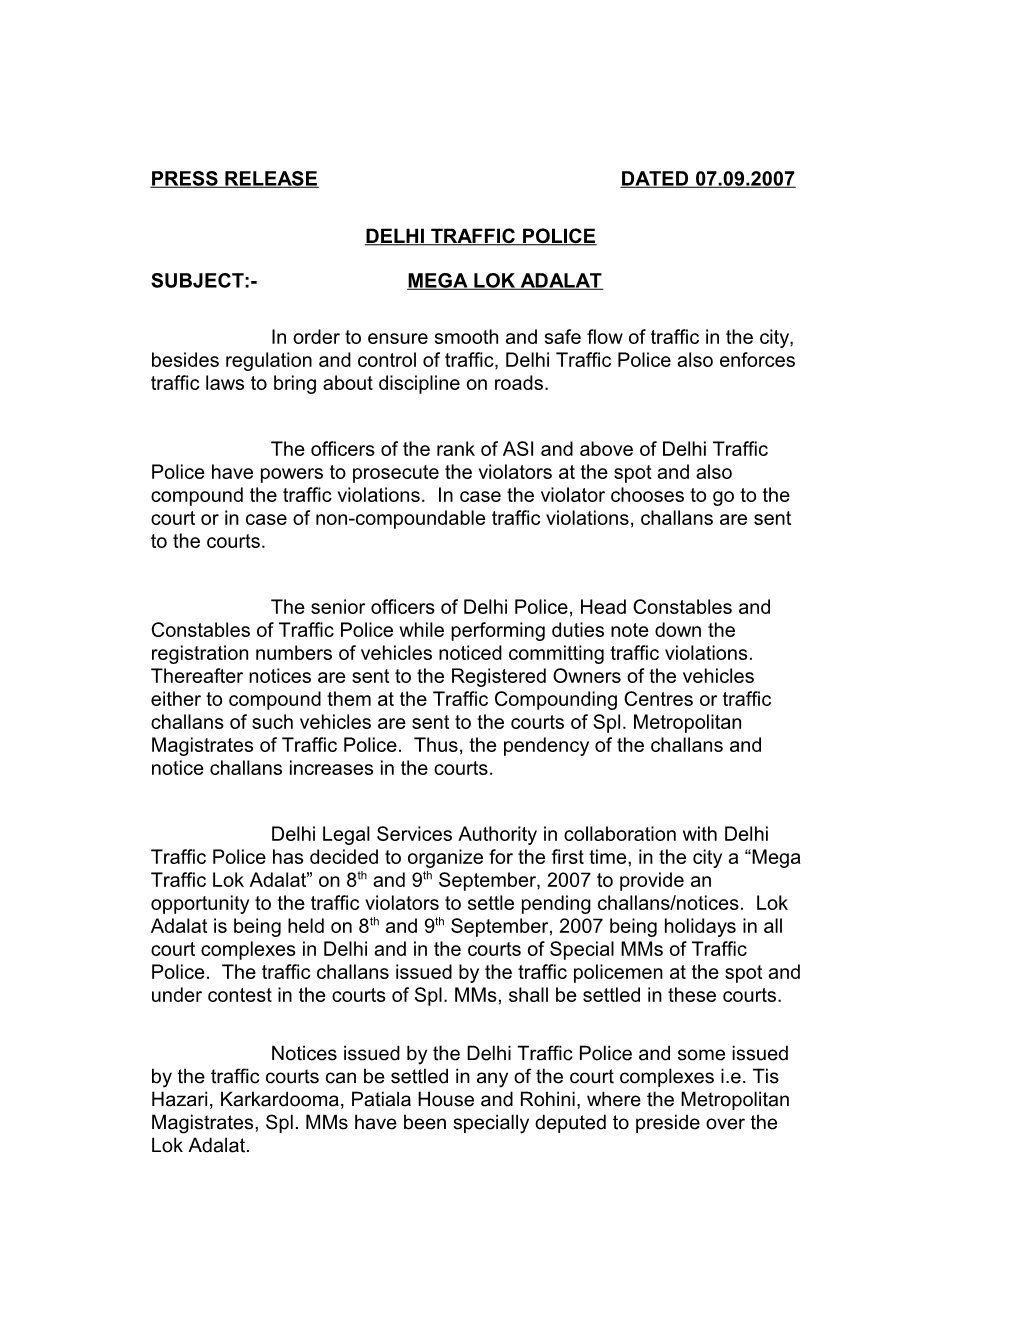 Press Release Dated 07.09.2007